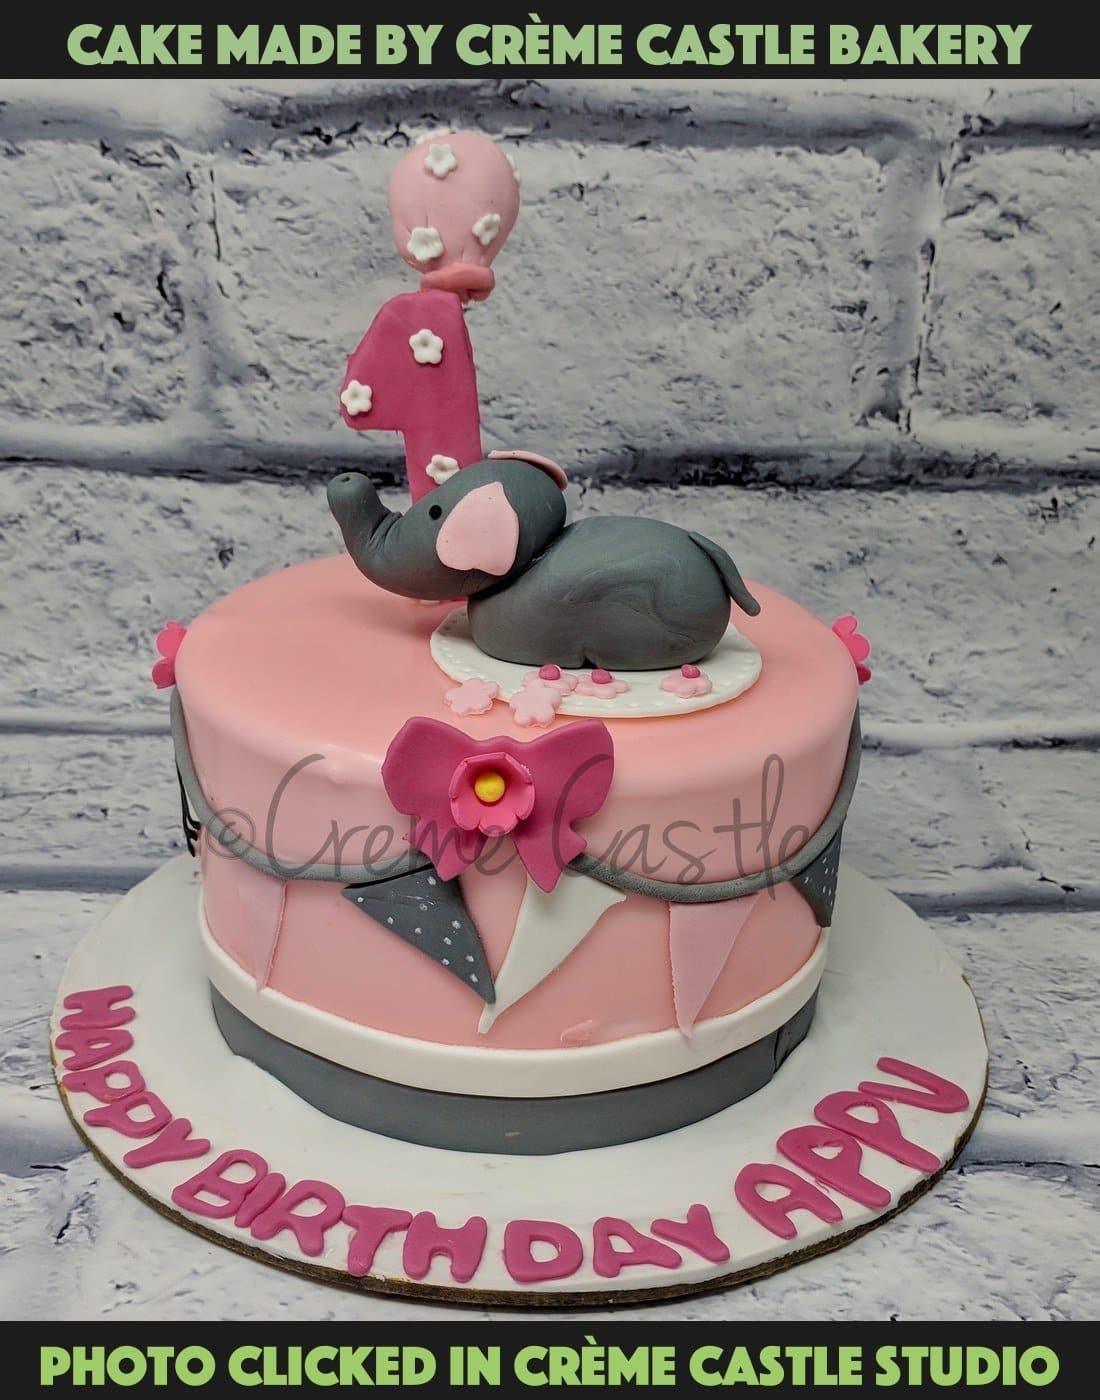 Baby Shower Cake: Adorable Design w/ Step-By-Step Tutorial